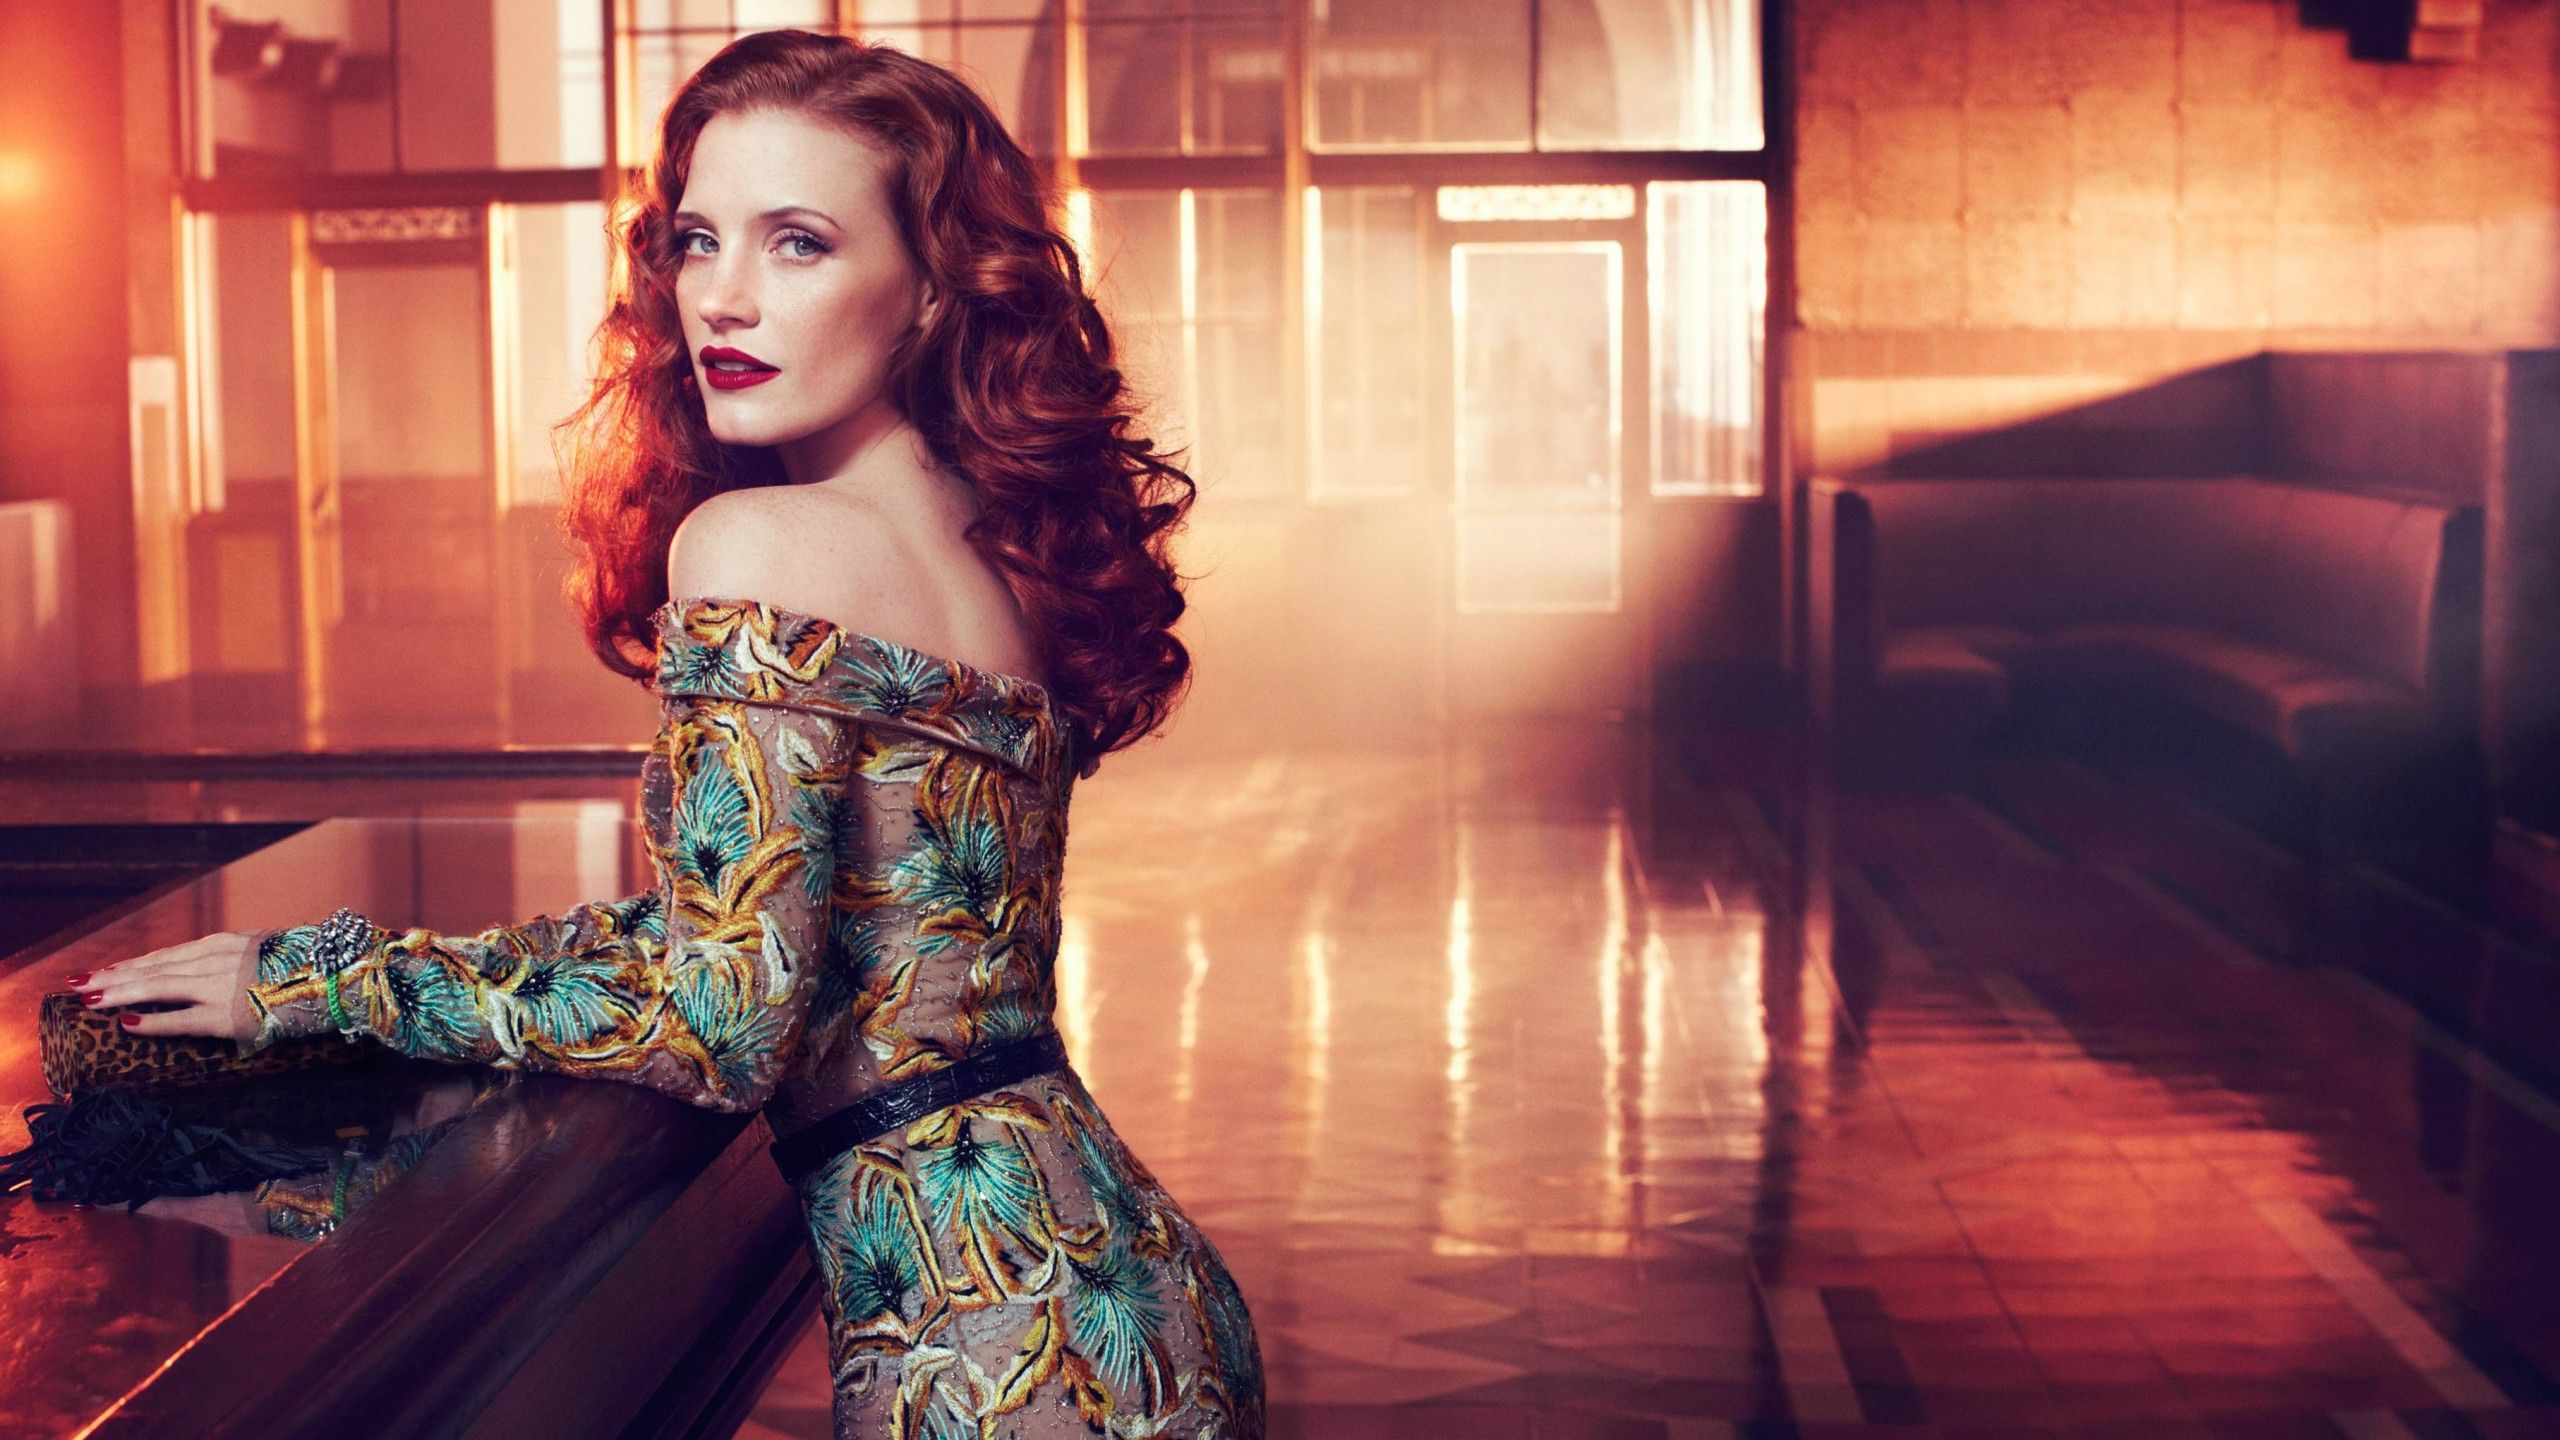 Wallpaper Jessica Chastain, red hair, beauty, dress, red lips